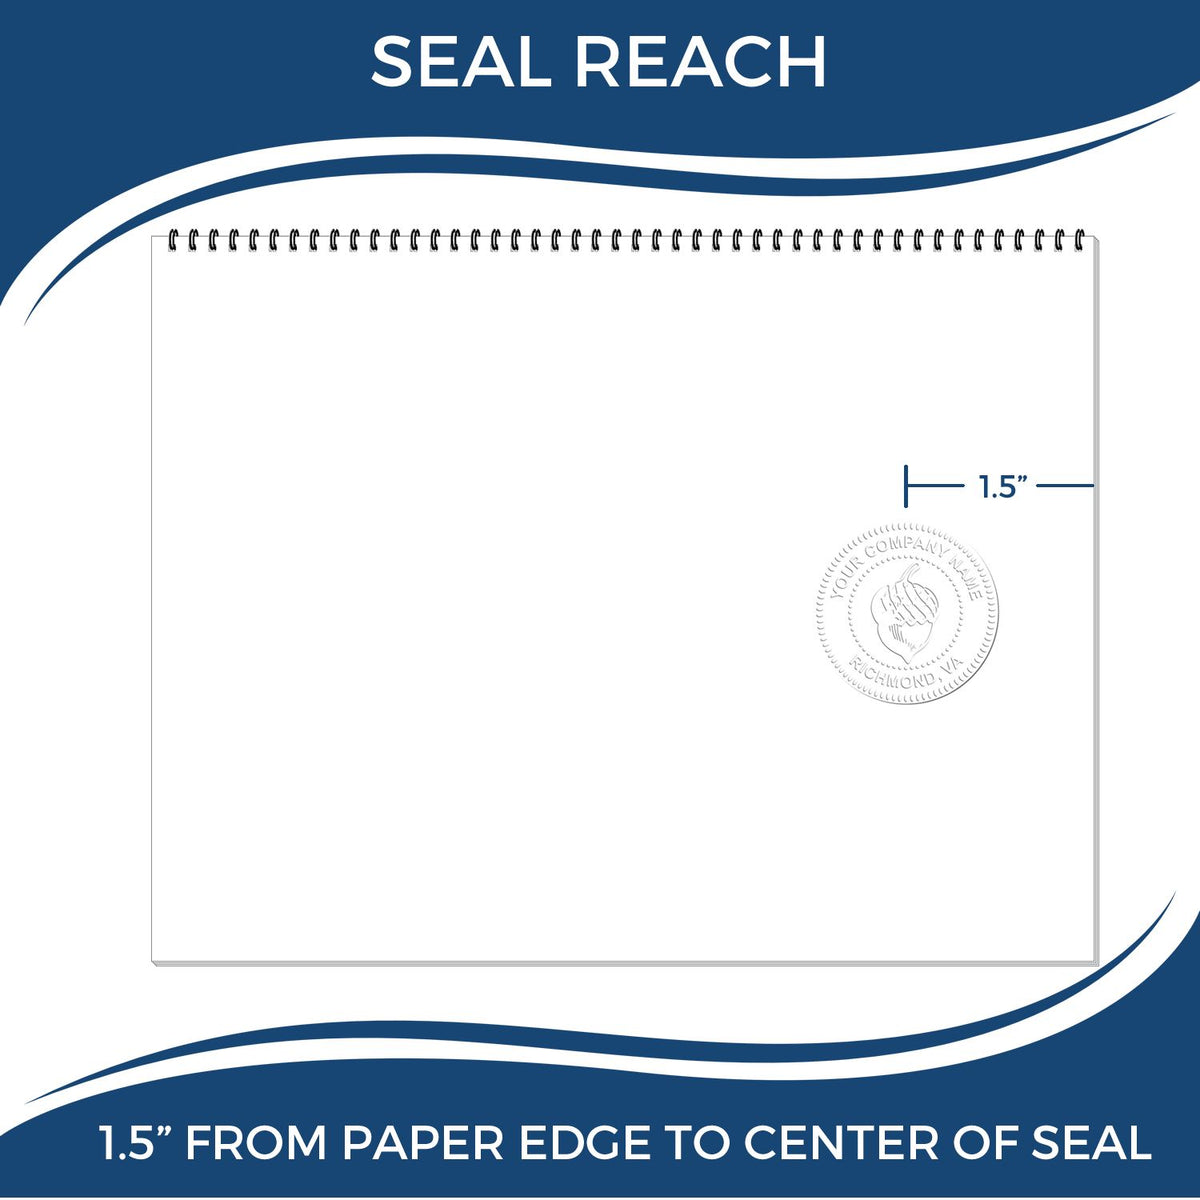 An infographic showing the seal reach which is represented by a ruler and a miniature seal image of the Soft Nevada Professional Engineer Seal